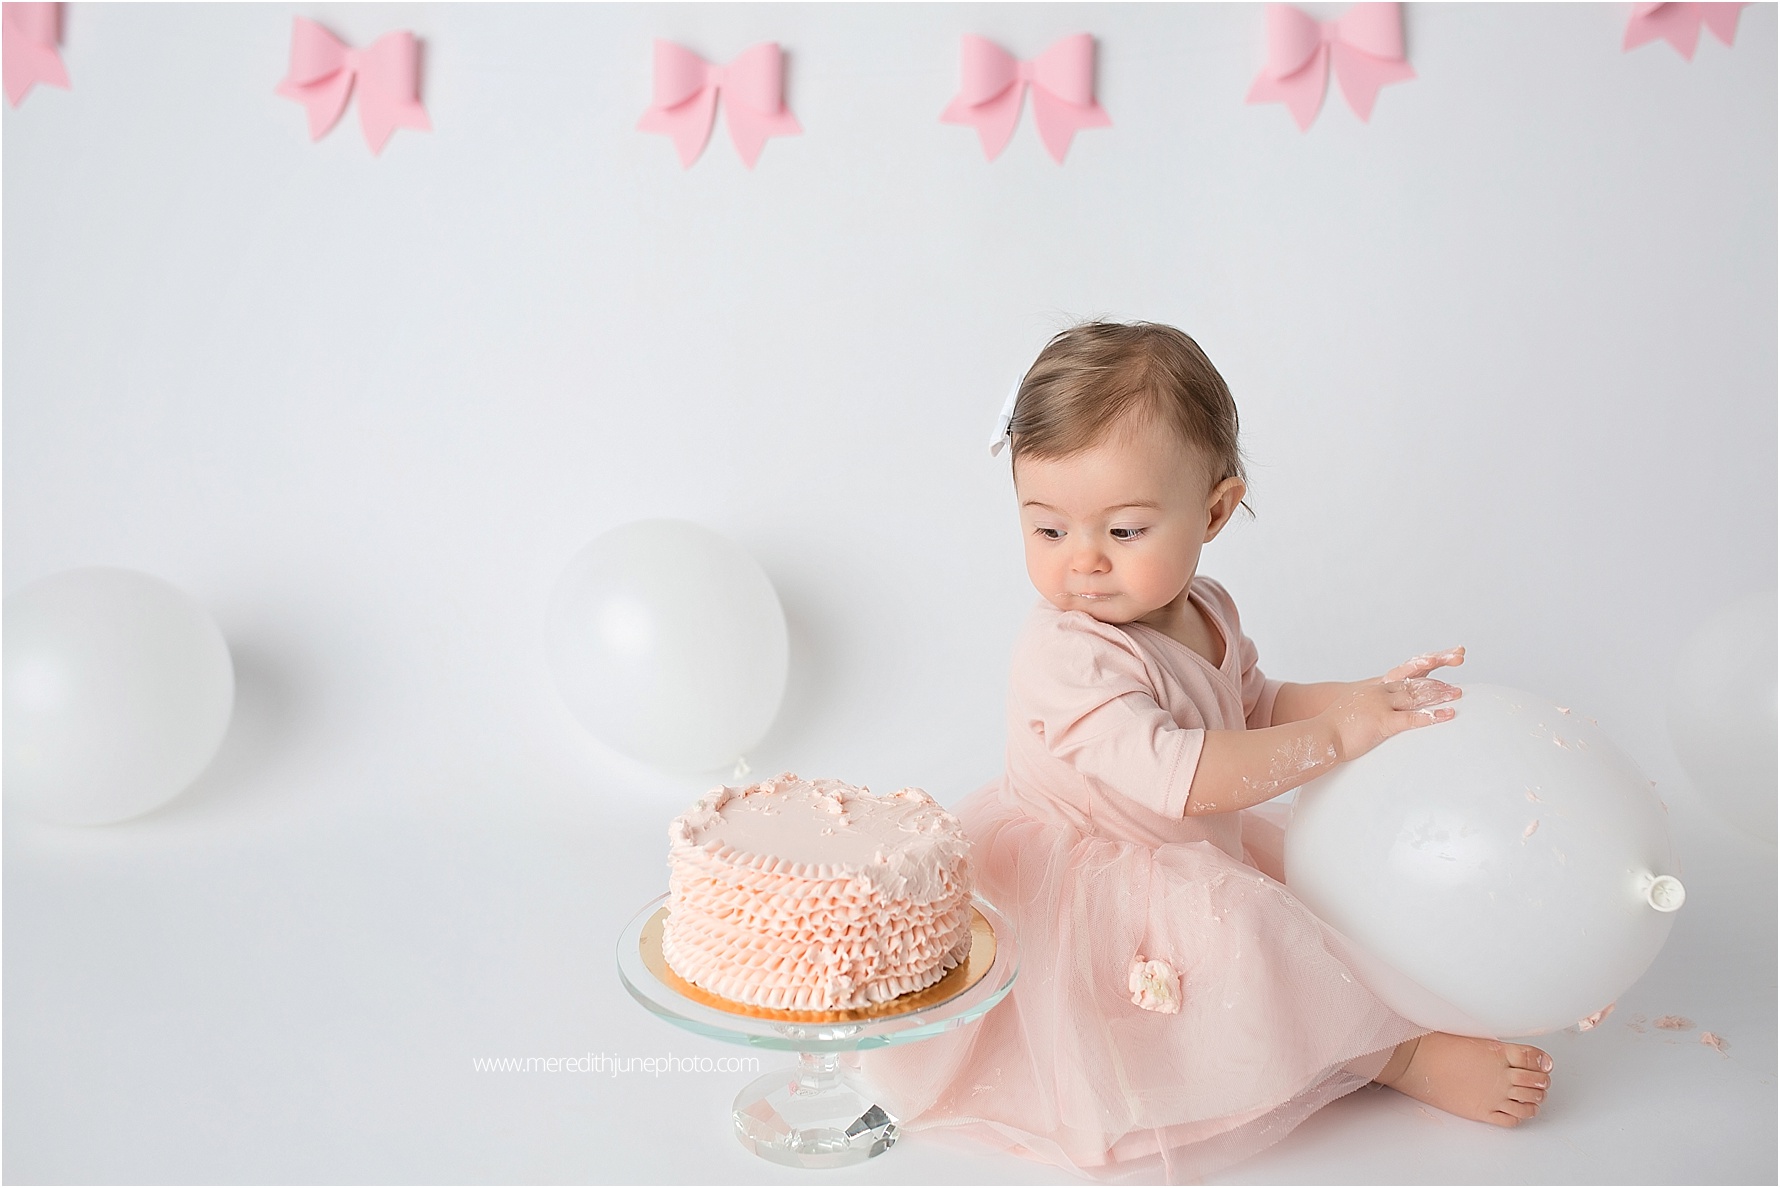 pink and white photo ideas